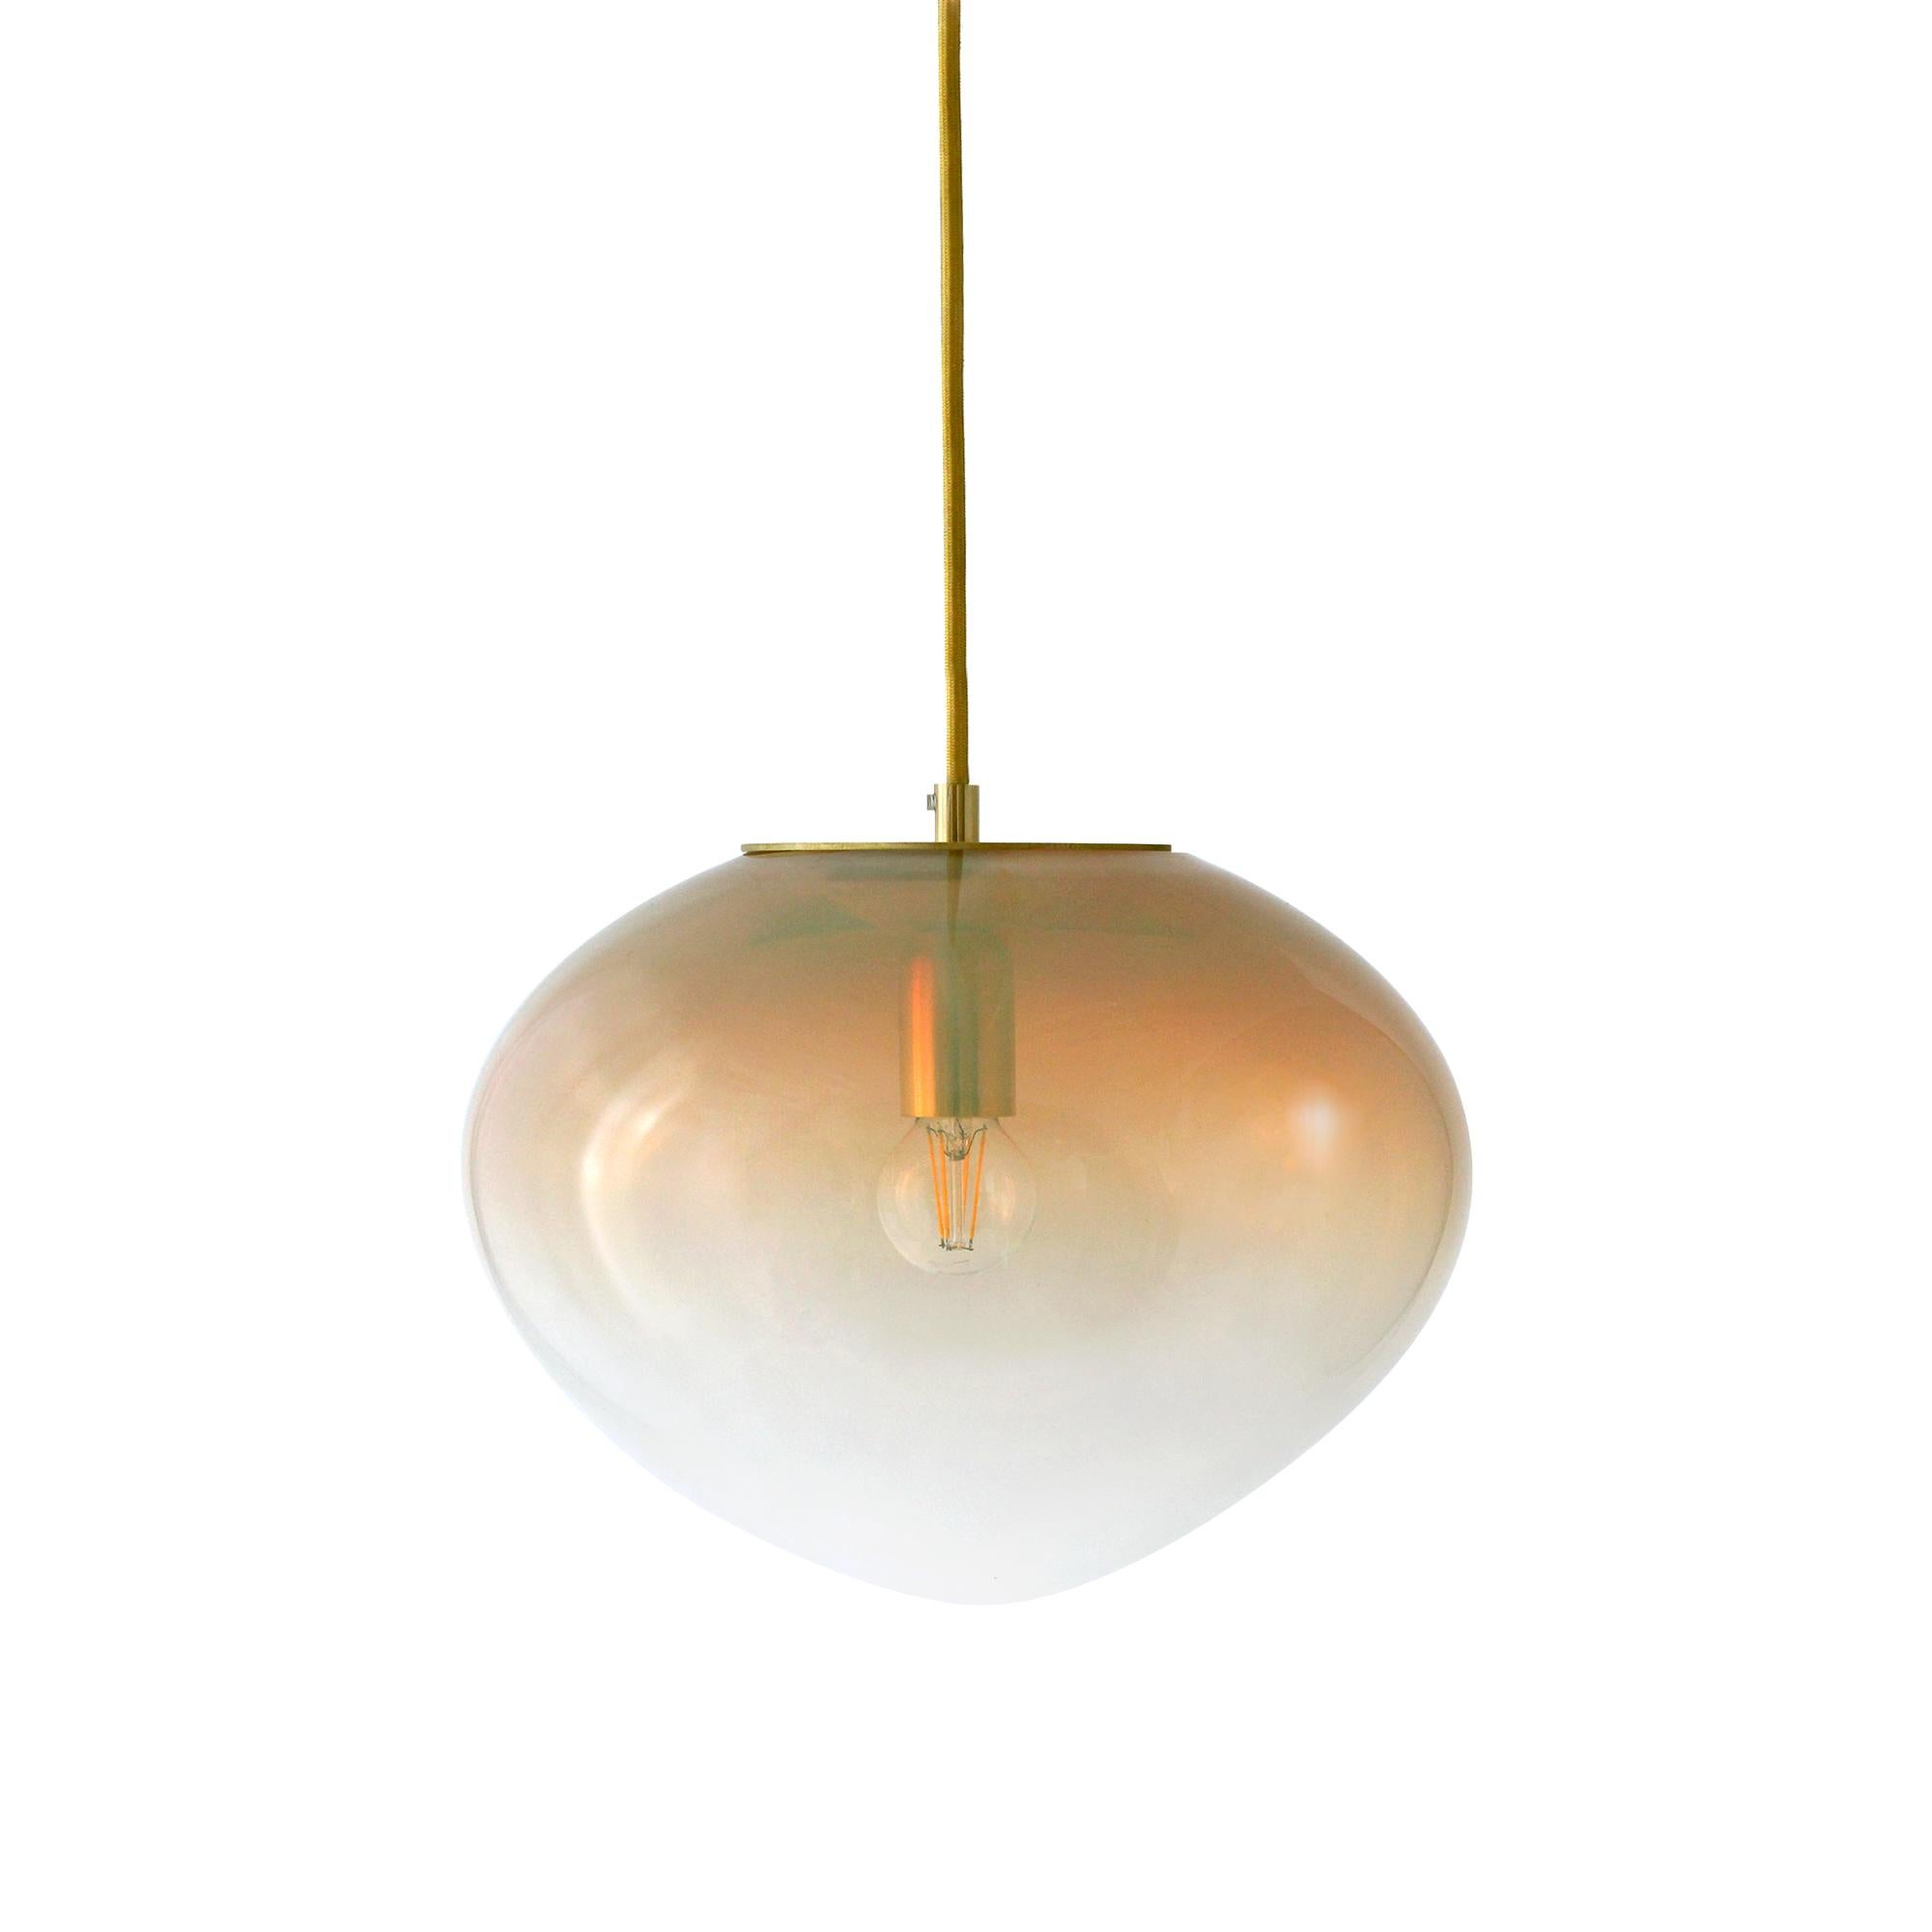 Sirius M pendant by ELOA.
No UL listed 
Material: LED bulb, glass.
Dimensions: D 27 x W 32 x H 20 cm.
Also aAvailable in different colours and dimensions.

All our lamps can be wired according to each country. If sold to the USA it will be wired for